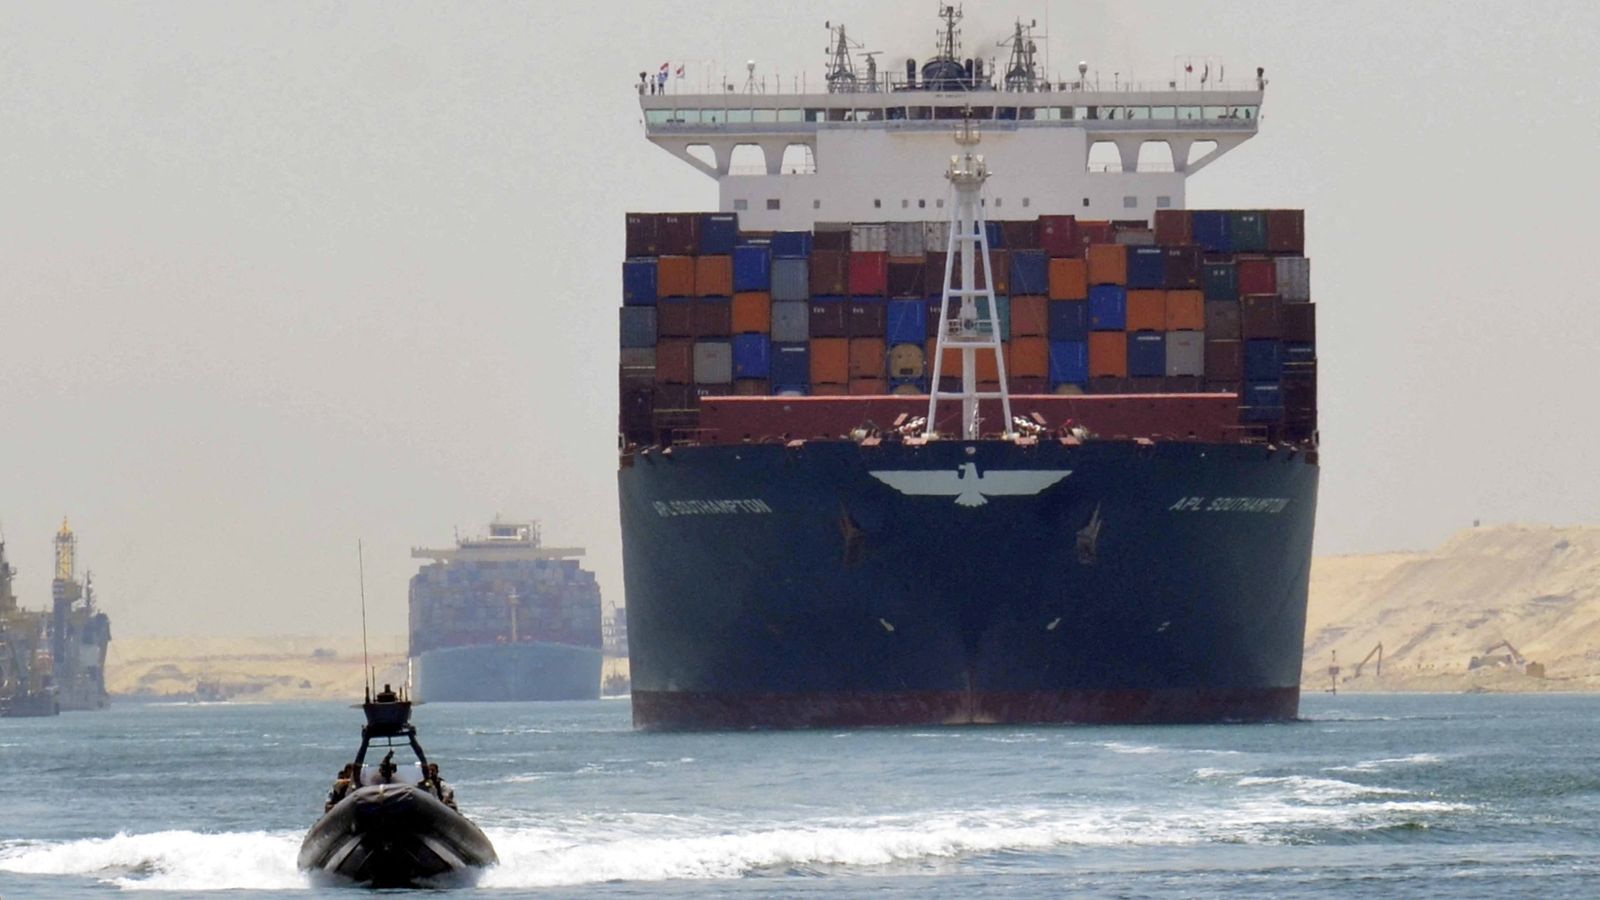 Freight through Suez Canal slashed by almost half in wake of Houthi attacks, says UN agency